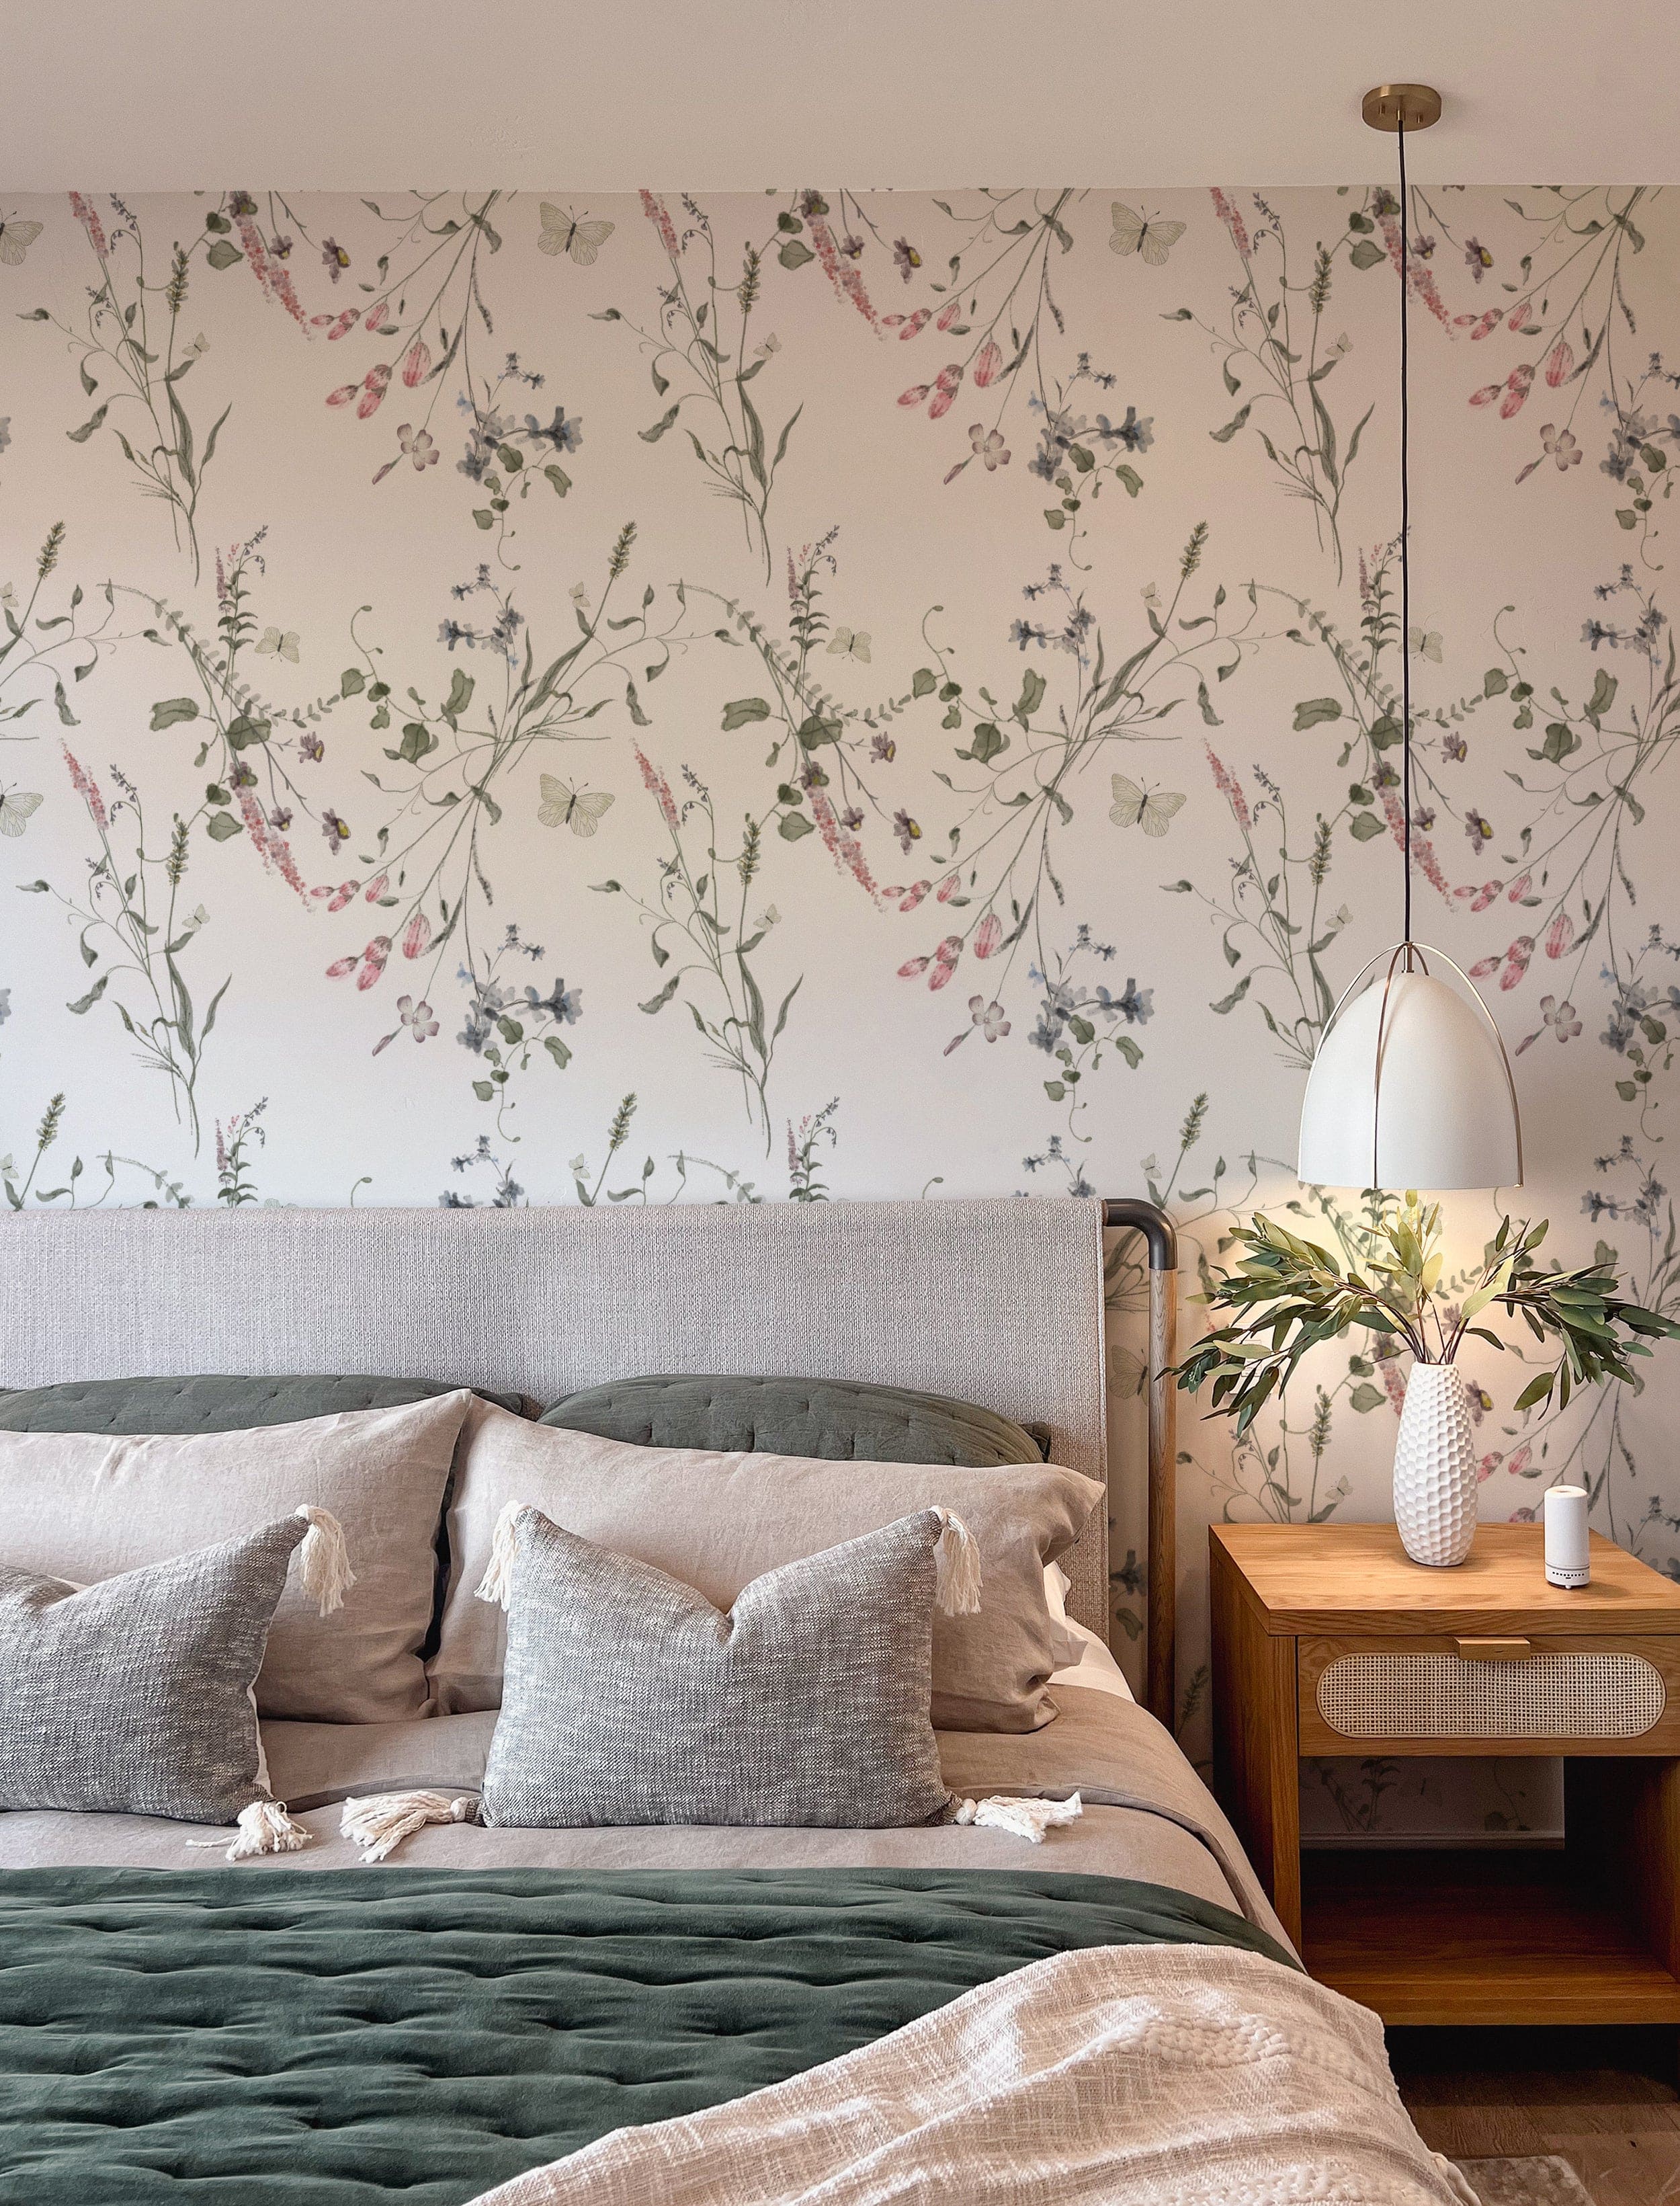 A cozy bedroom setting with the Lovely Botanicals Wallpaper creating a tranquil backdrop. The wallpaper's subtle floral and butterfly designs in soft hues add a soothing touch to the room, accompanied by plush pillows and a stylish bedside lamp.